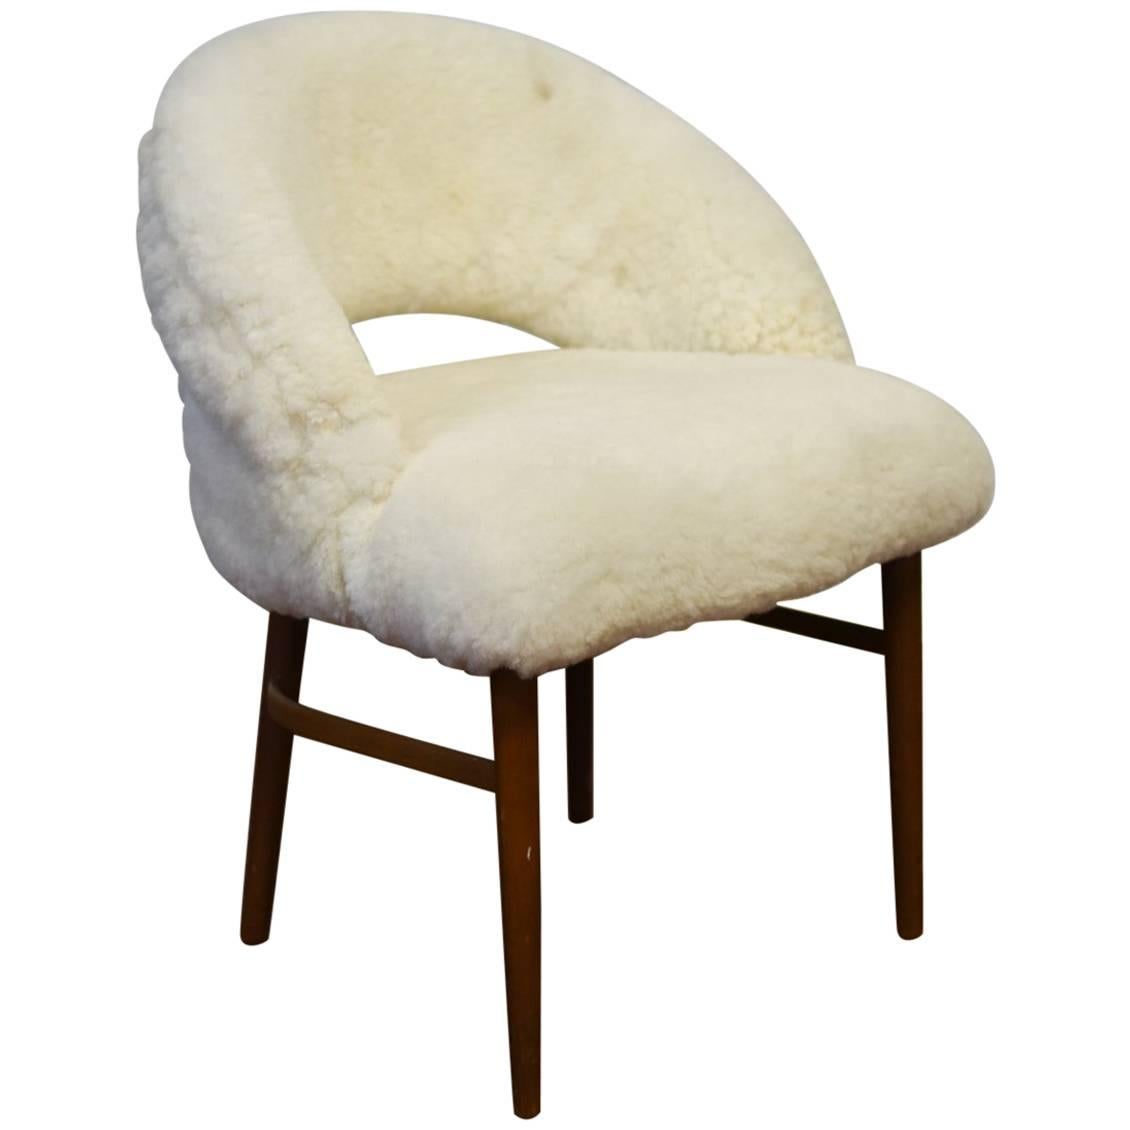 Exquisite Mid-Century Accent or Vanity Chair in Lambsfur by Frode Holm